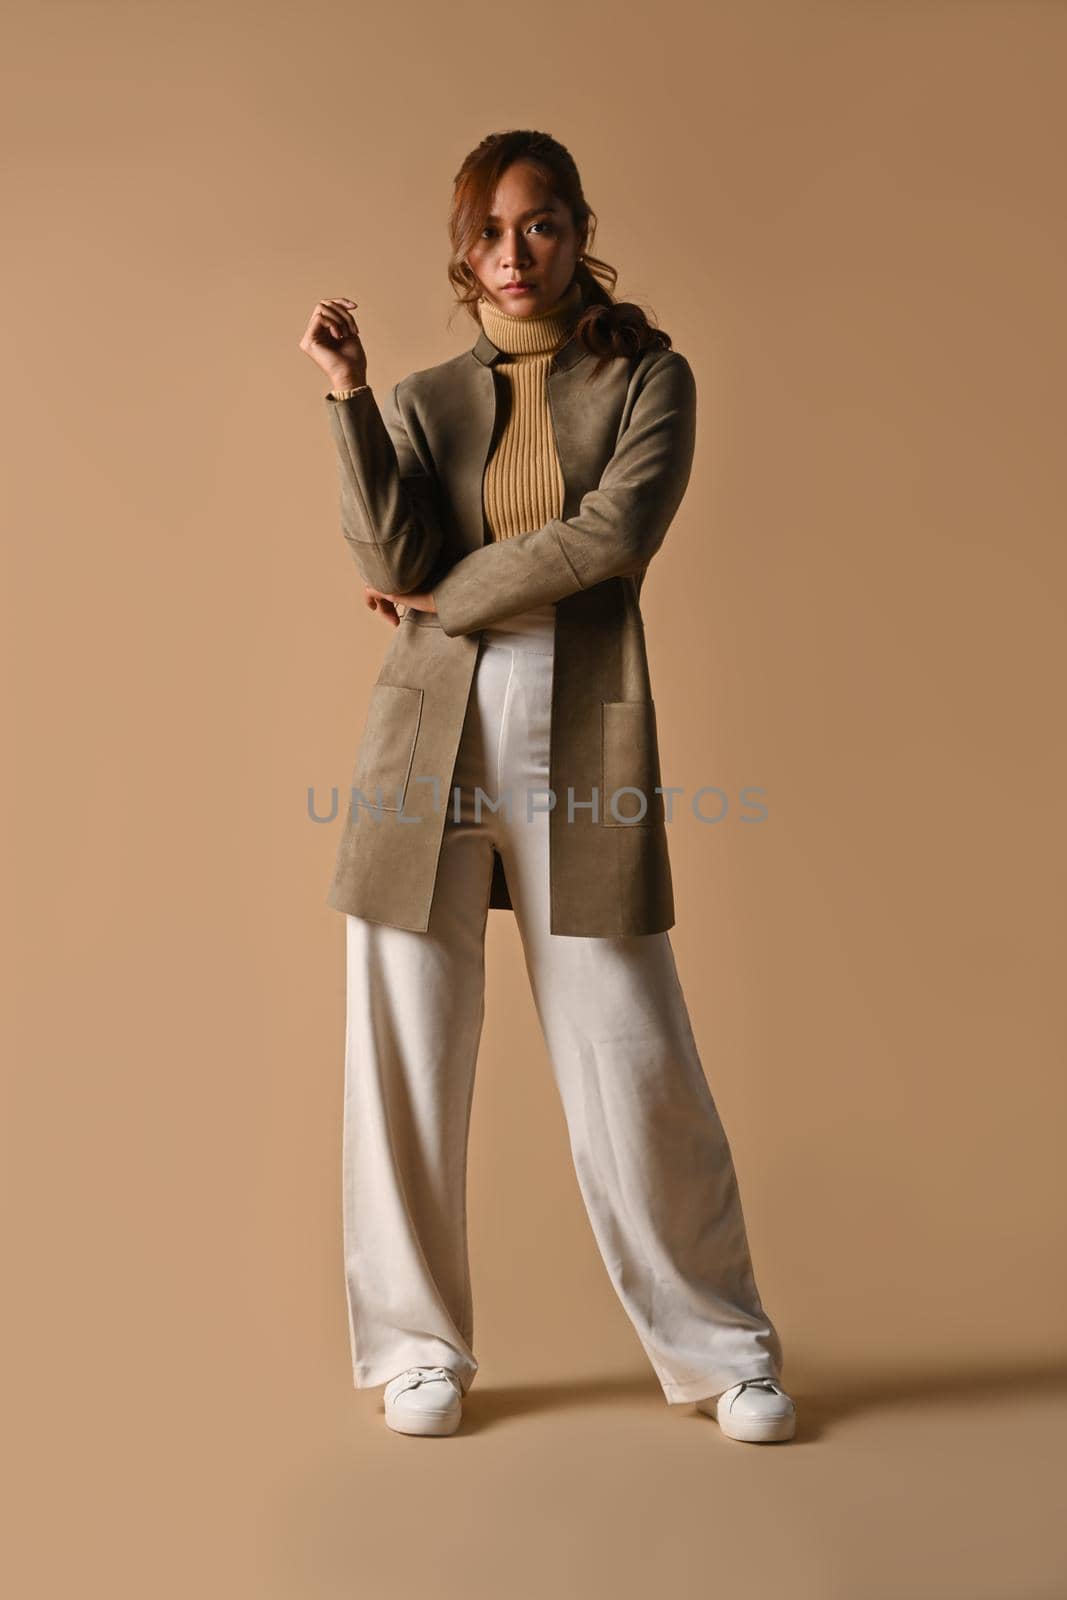 Full length portrait of beautiful young woman stylish autumn outfits standing on beige background.